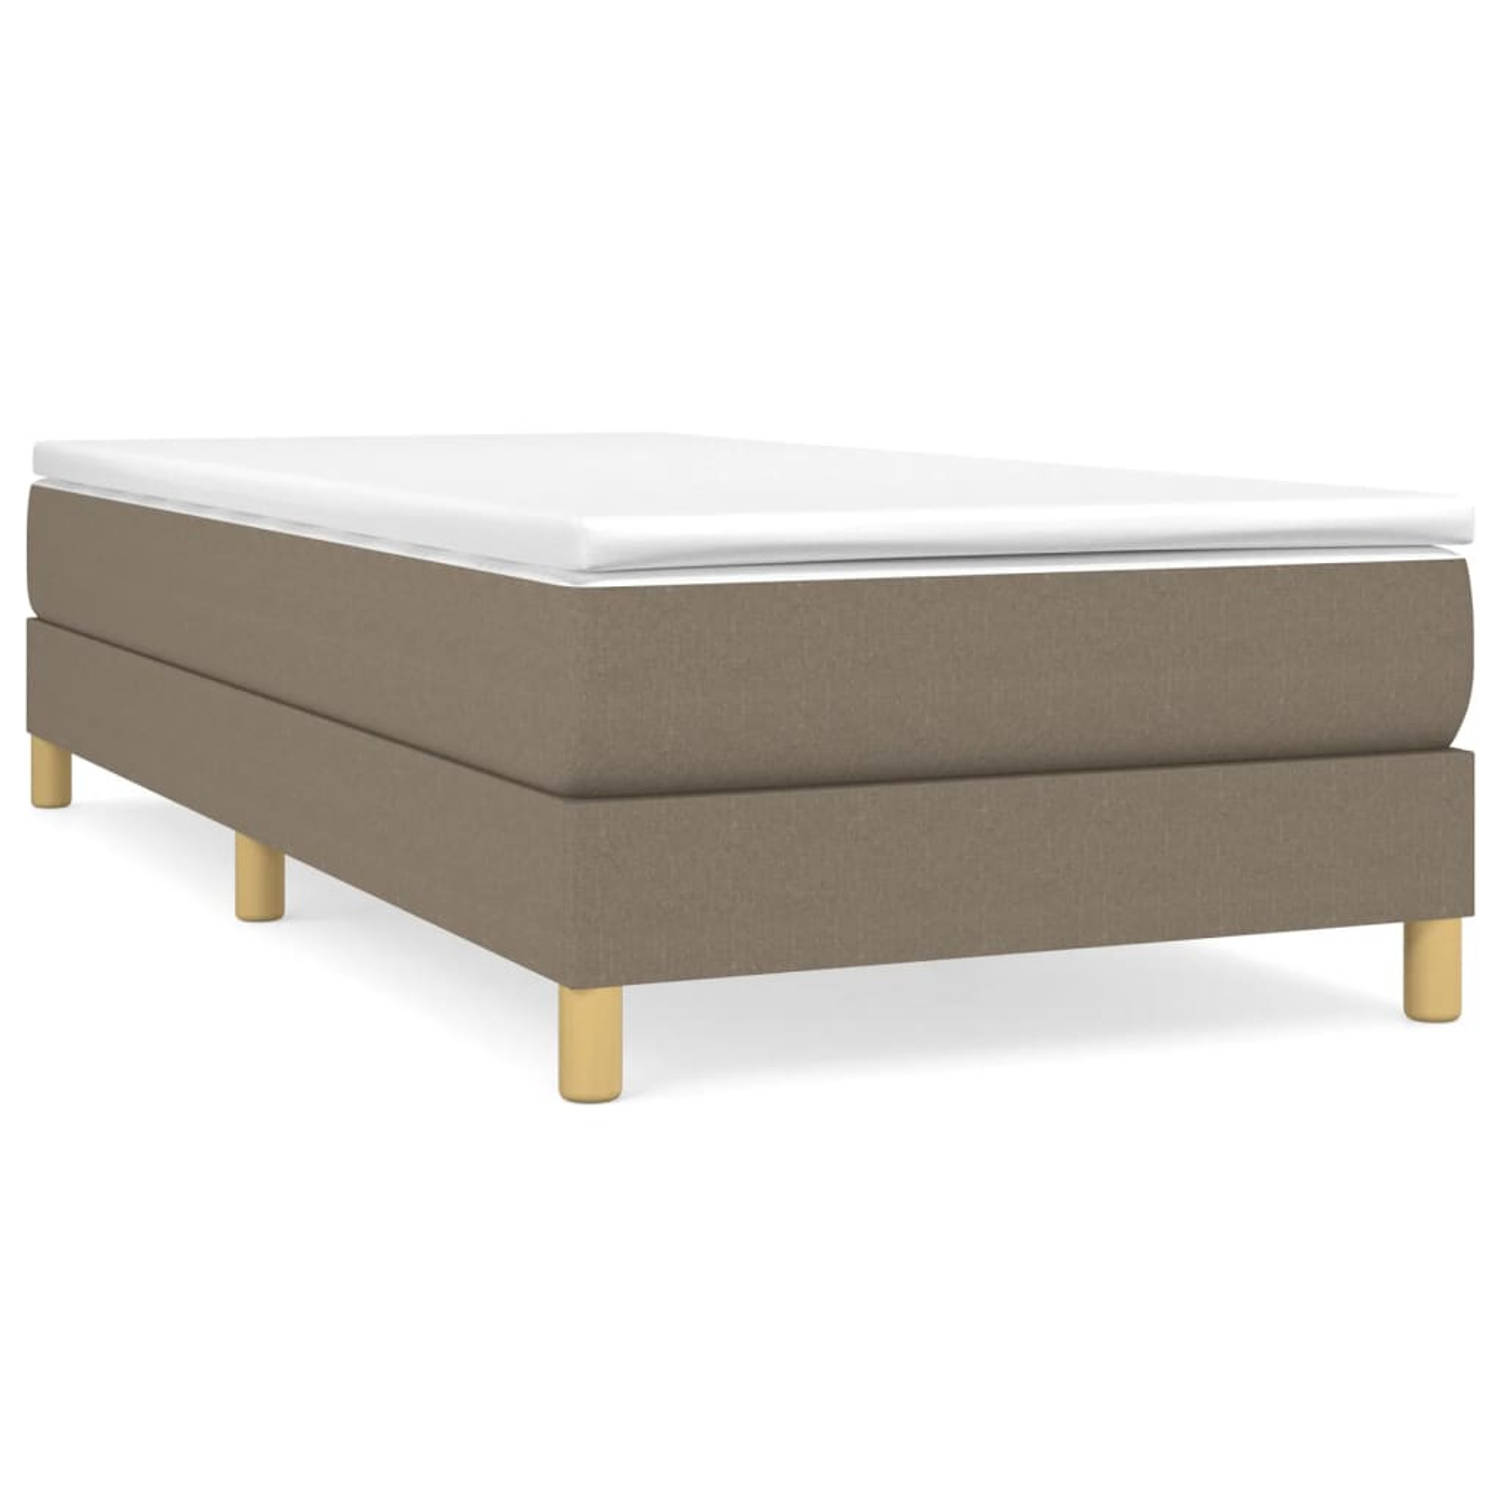 The Living Store Boxspringframe stof taupe 90x200 cm - Boxspringframe - Boxspringframes - Bed - Ledikant - Slaapmeubel - Bedframe - Bedbodem - Eenpersoonsbed - Boxspring - Bedden -